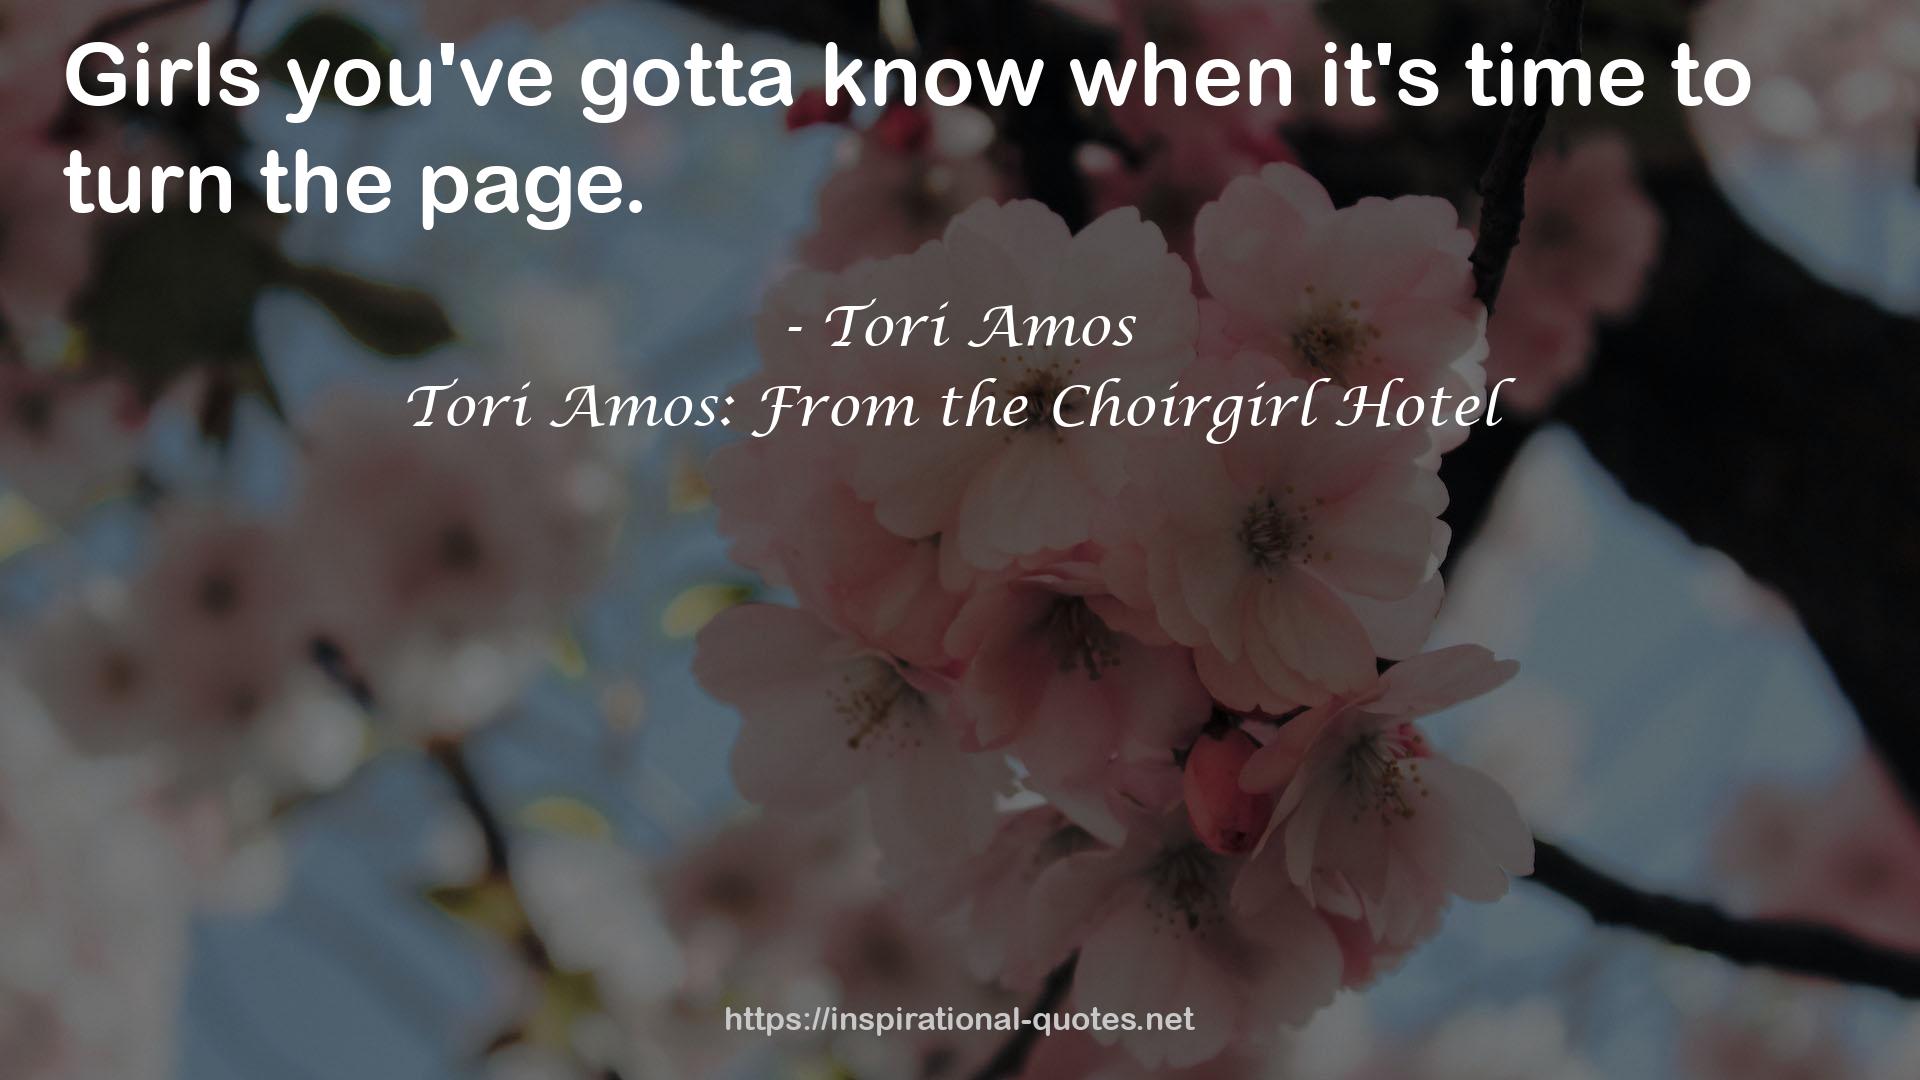 Tori Amos: From the Choirgirl Hotel QUOTES